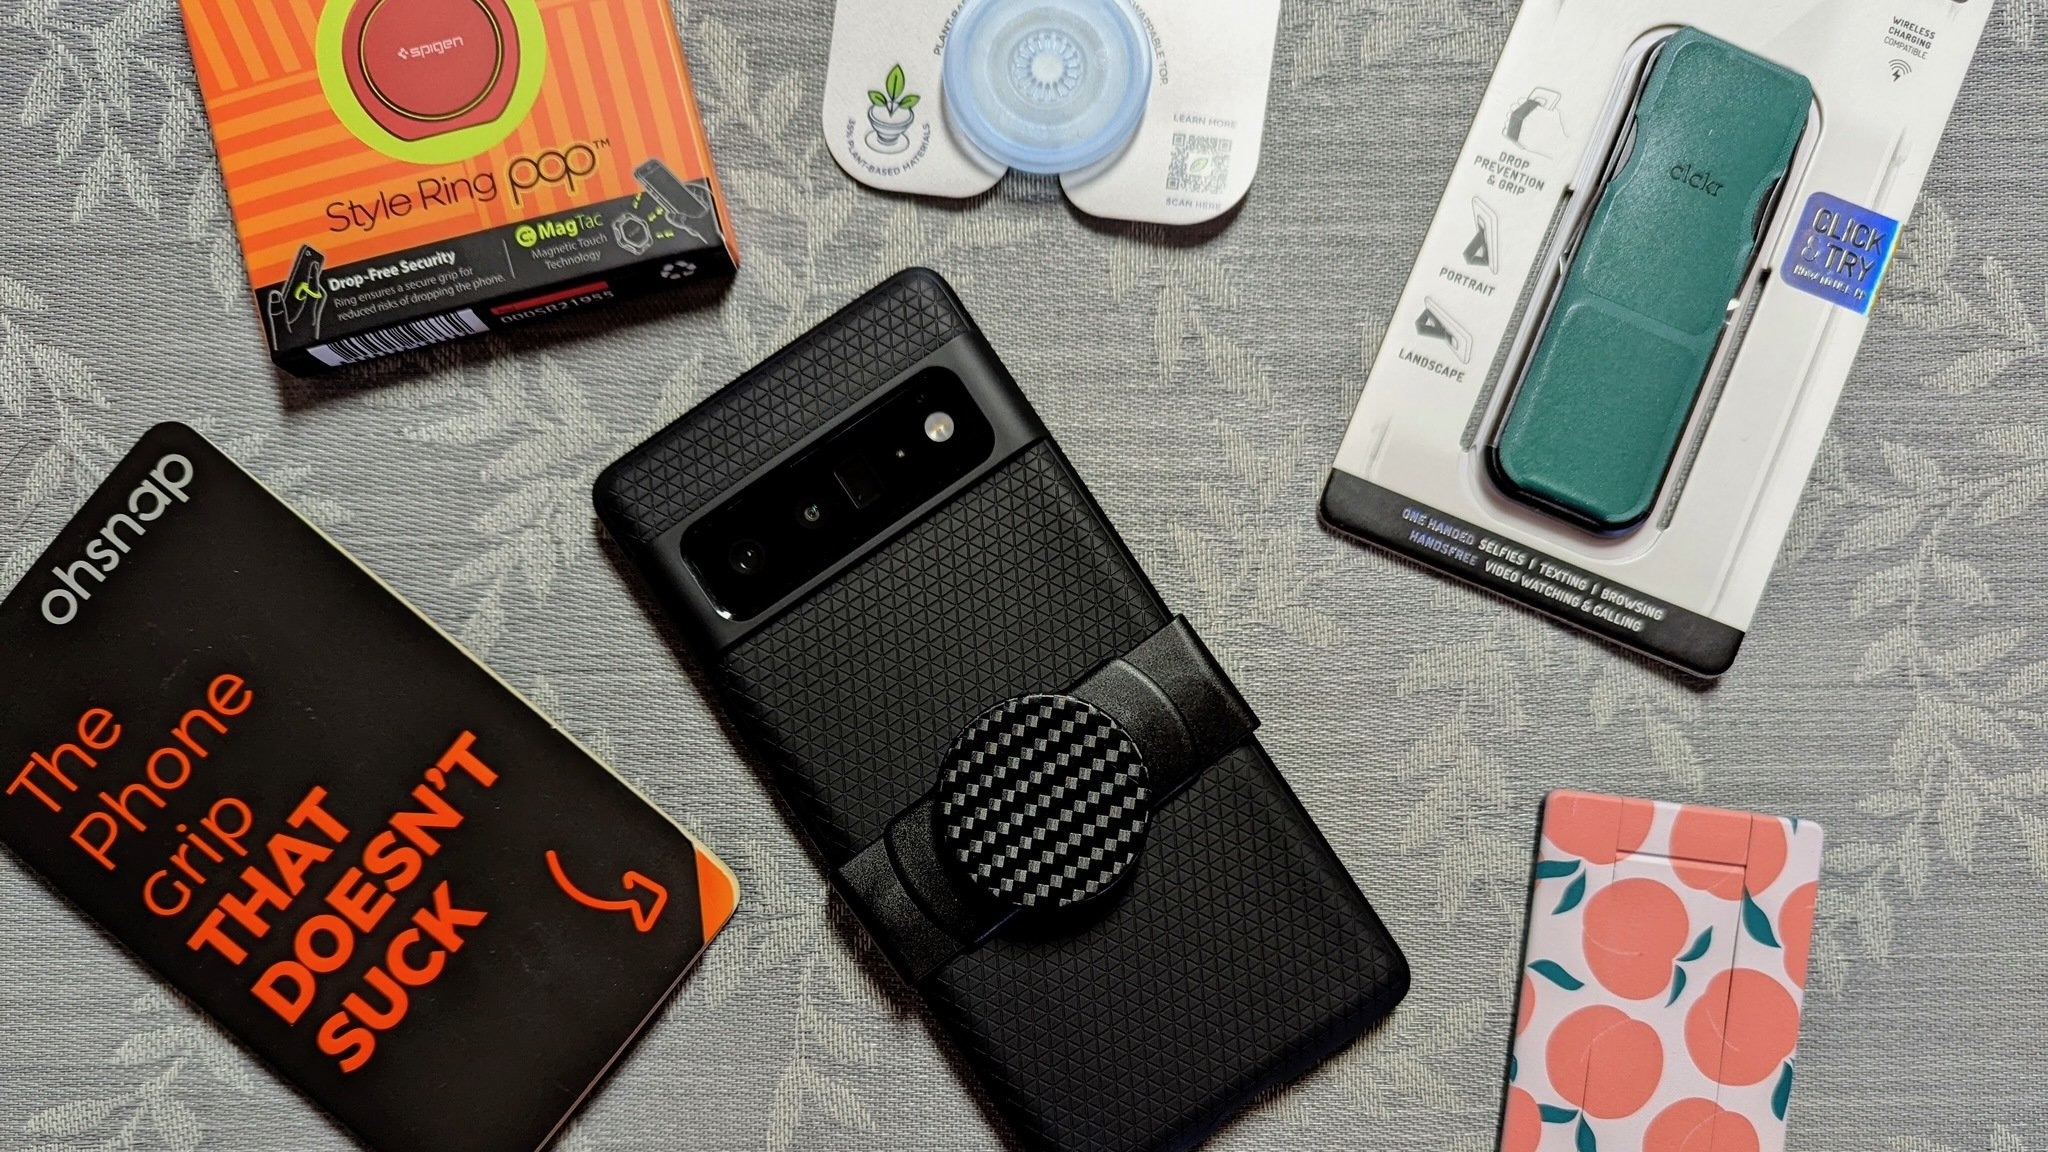 10 Iphone cases with popsocket ideas